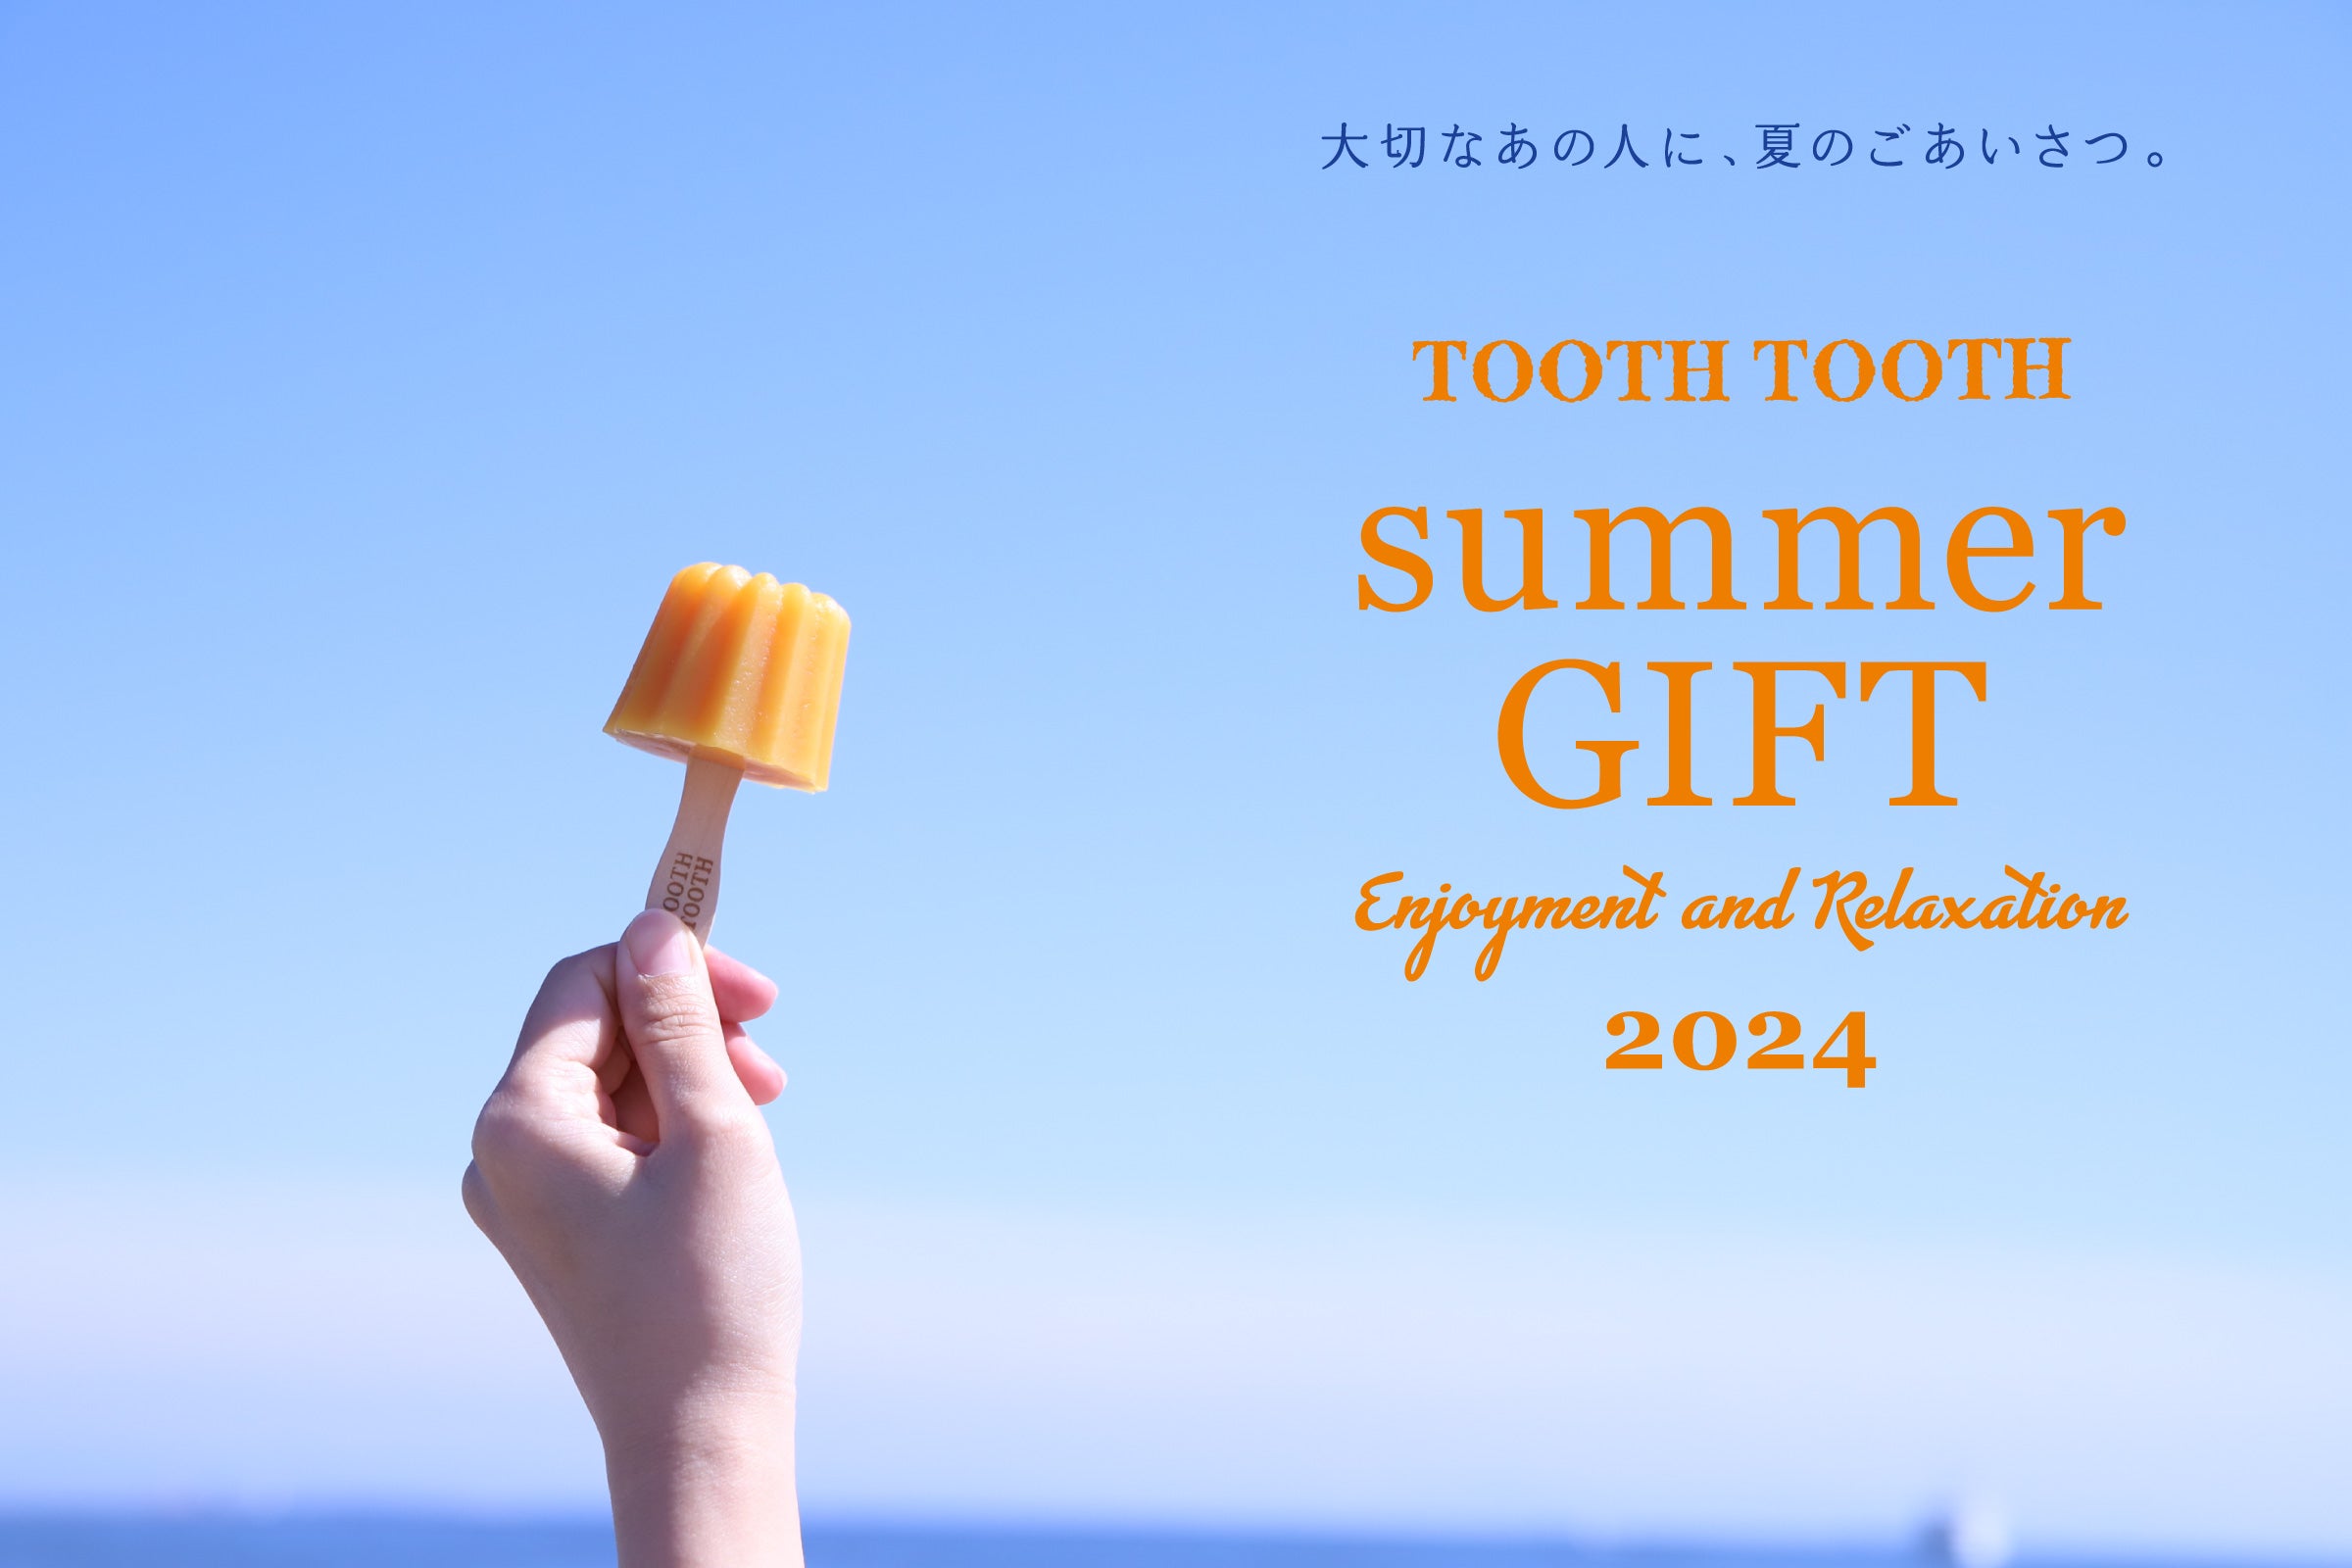 TOOTH  TOOTH SUMMER GIFt